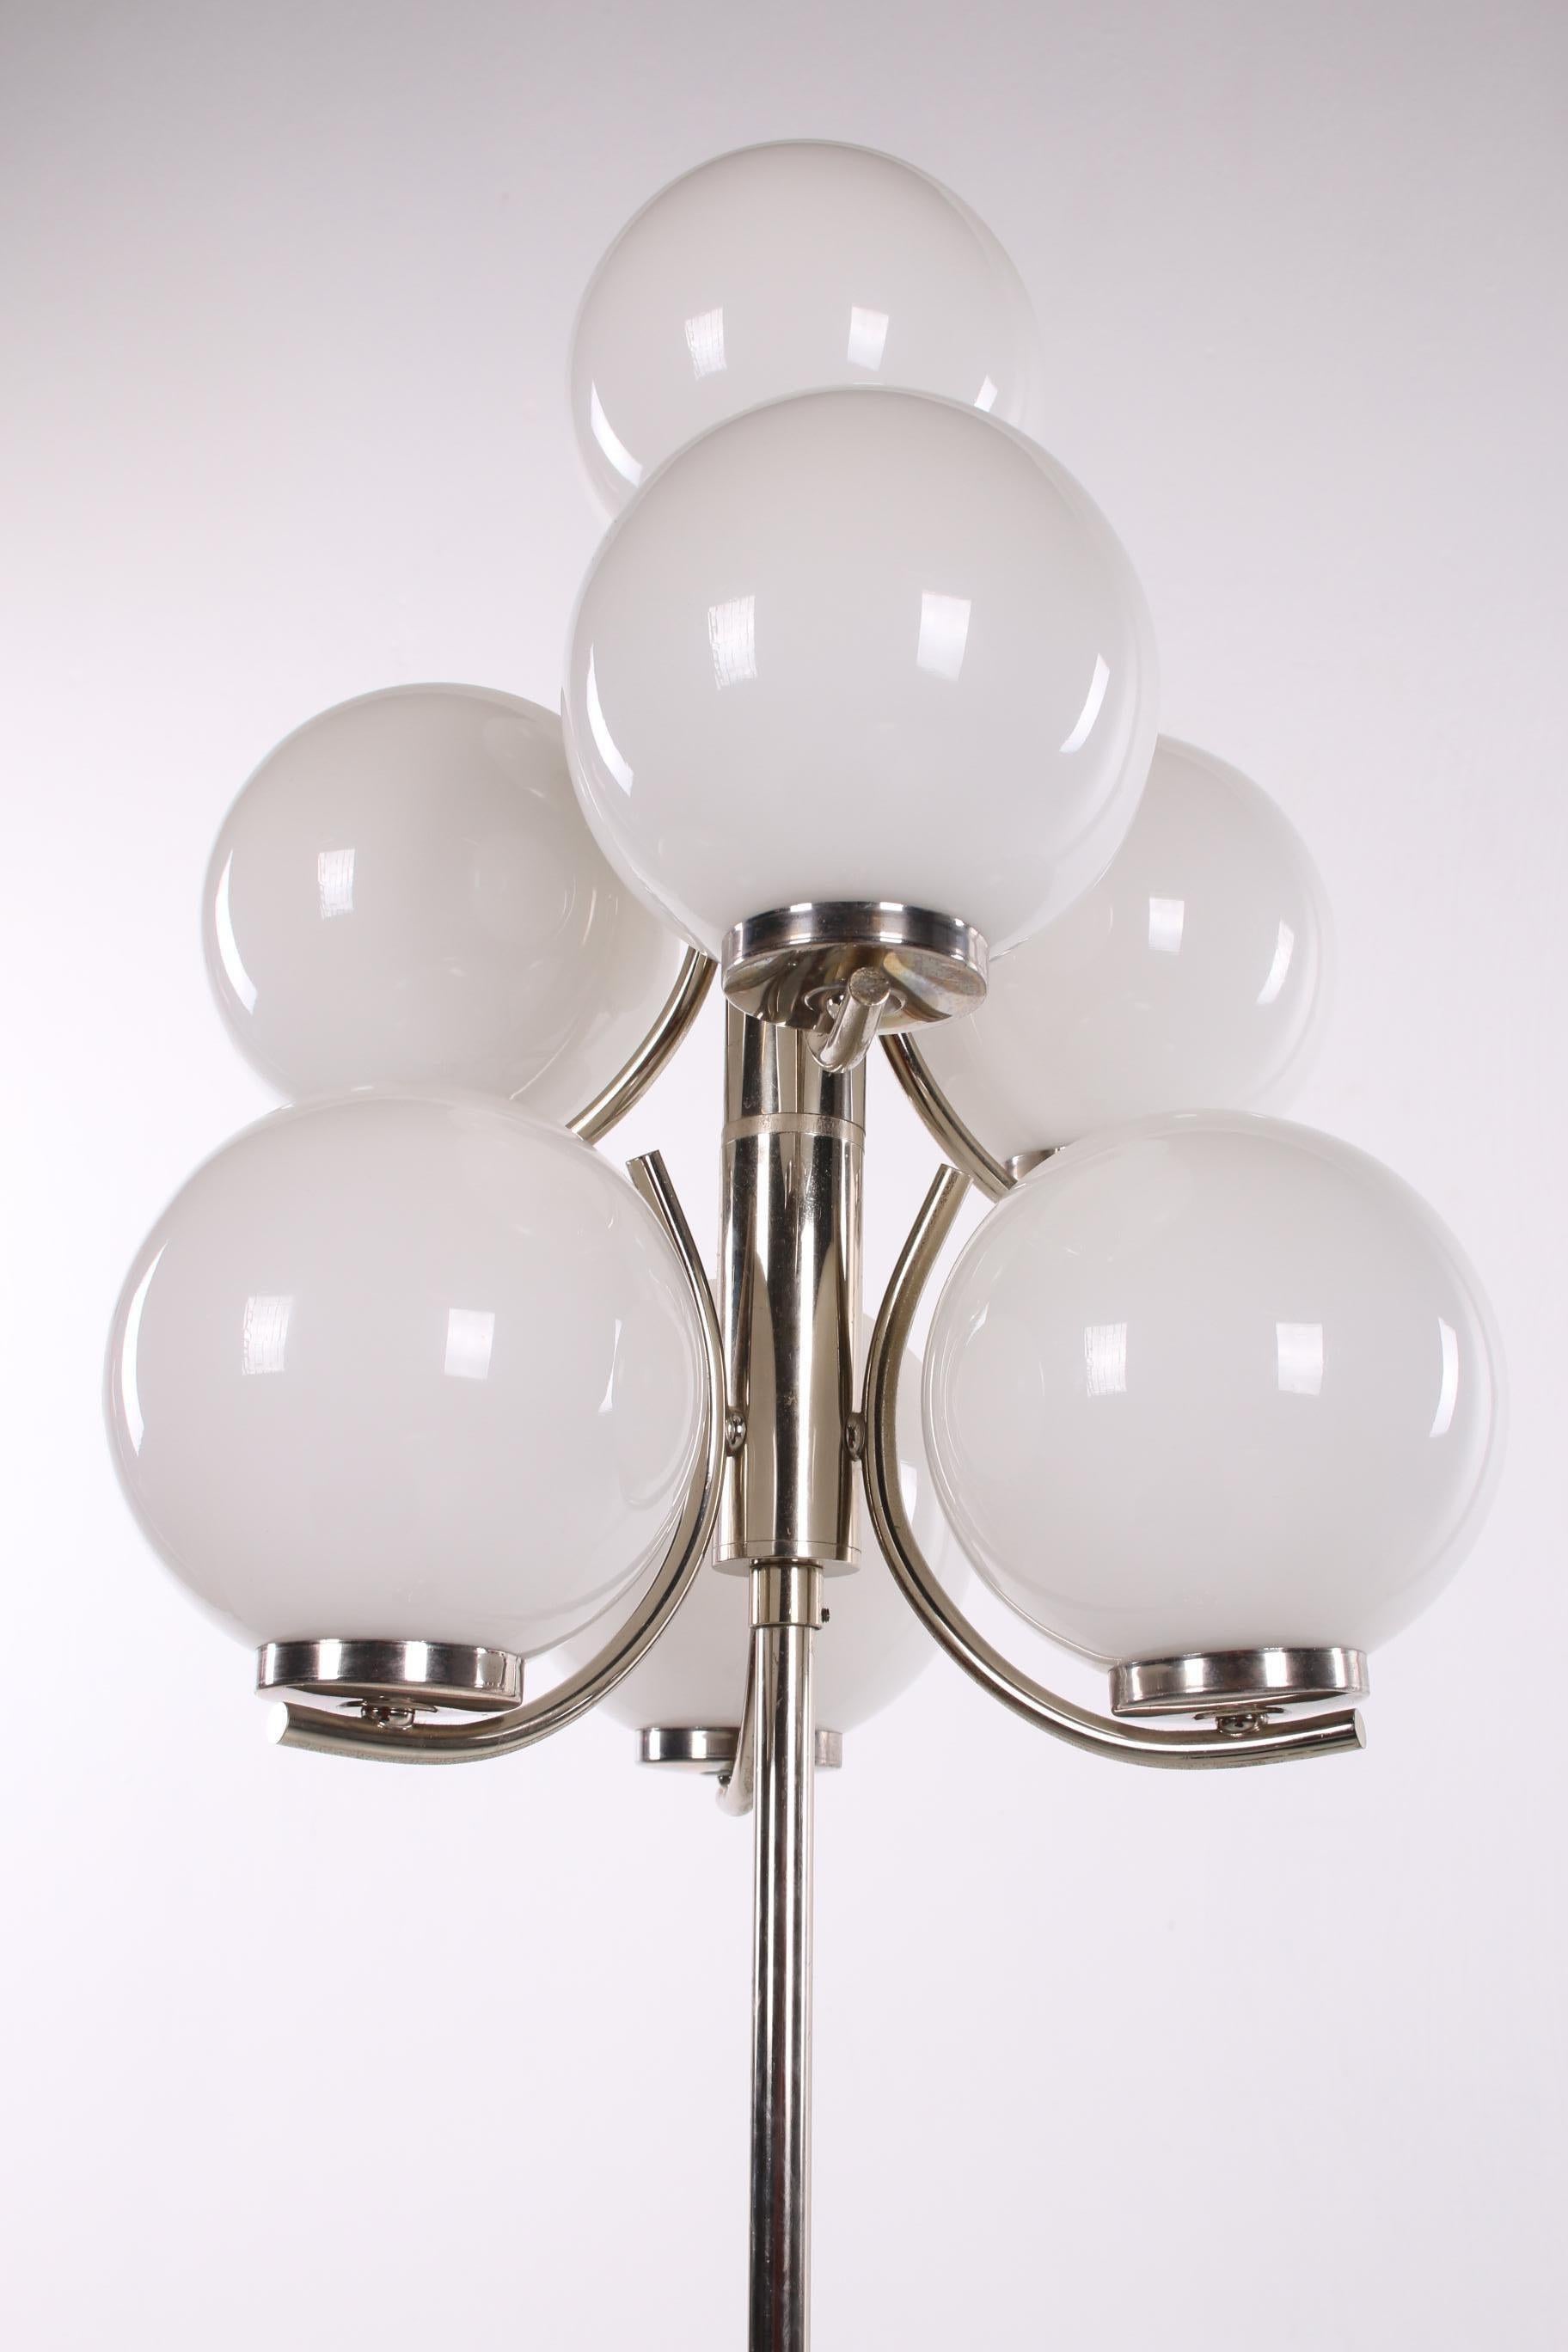 Vintage designer floor lamp estimated to be from Germany in the 1960s. 

The lamp has a chrome base with beautiful ornate chrome details. This lamp also has 7 beautiful glass balls that spread a warm ambient light. 
The lamp is in perfect